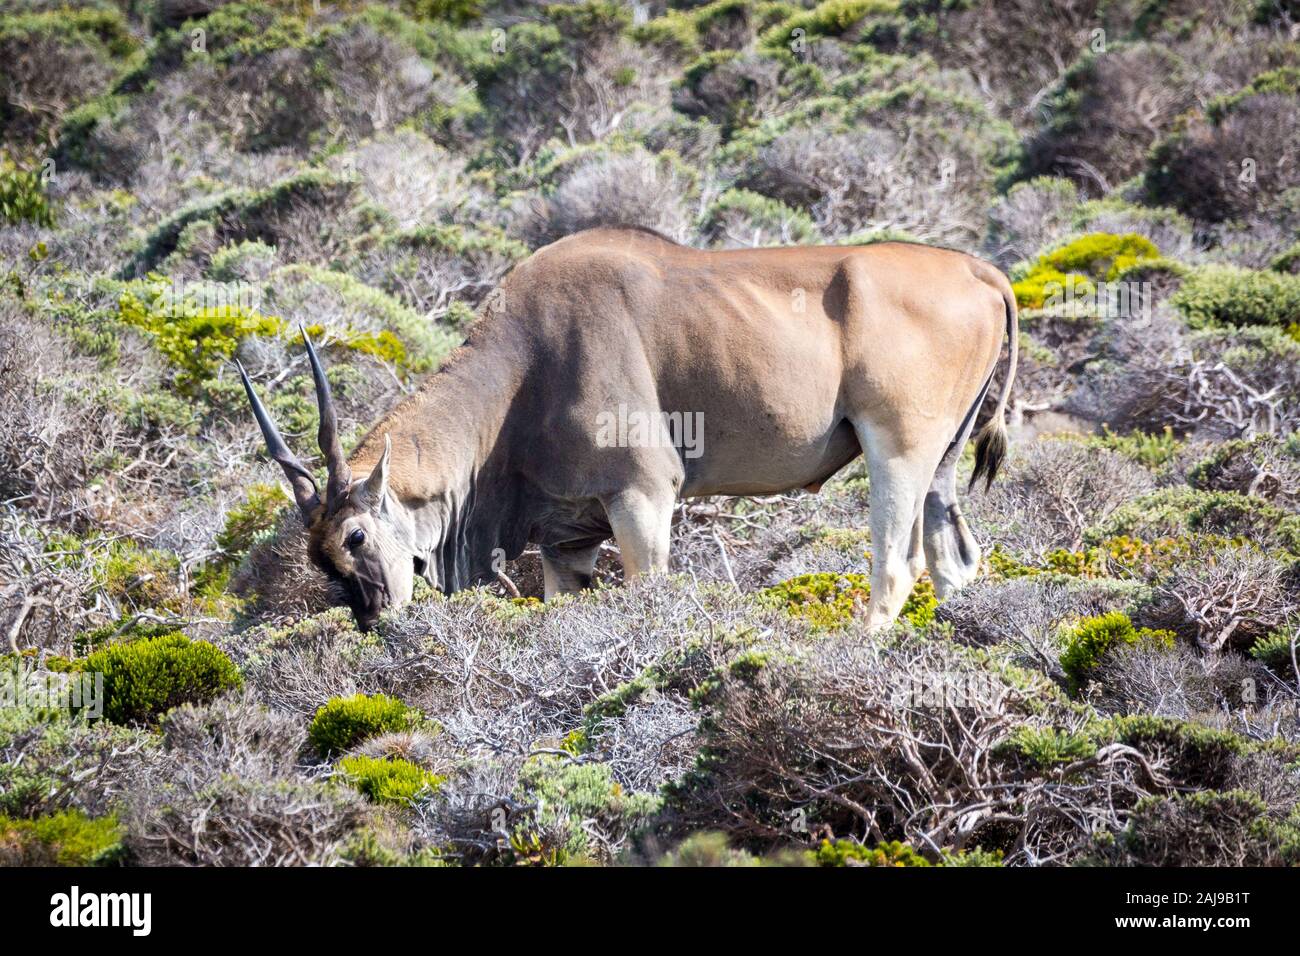 Close up of an Eland antelope (Taurotragus oryx) foraging in fynbos vegetation, South Africa Stock Photo